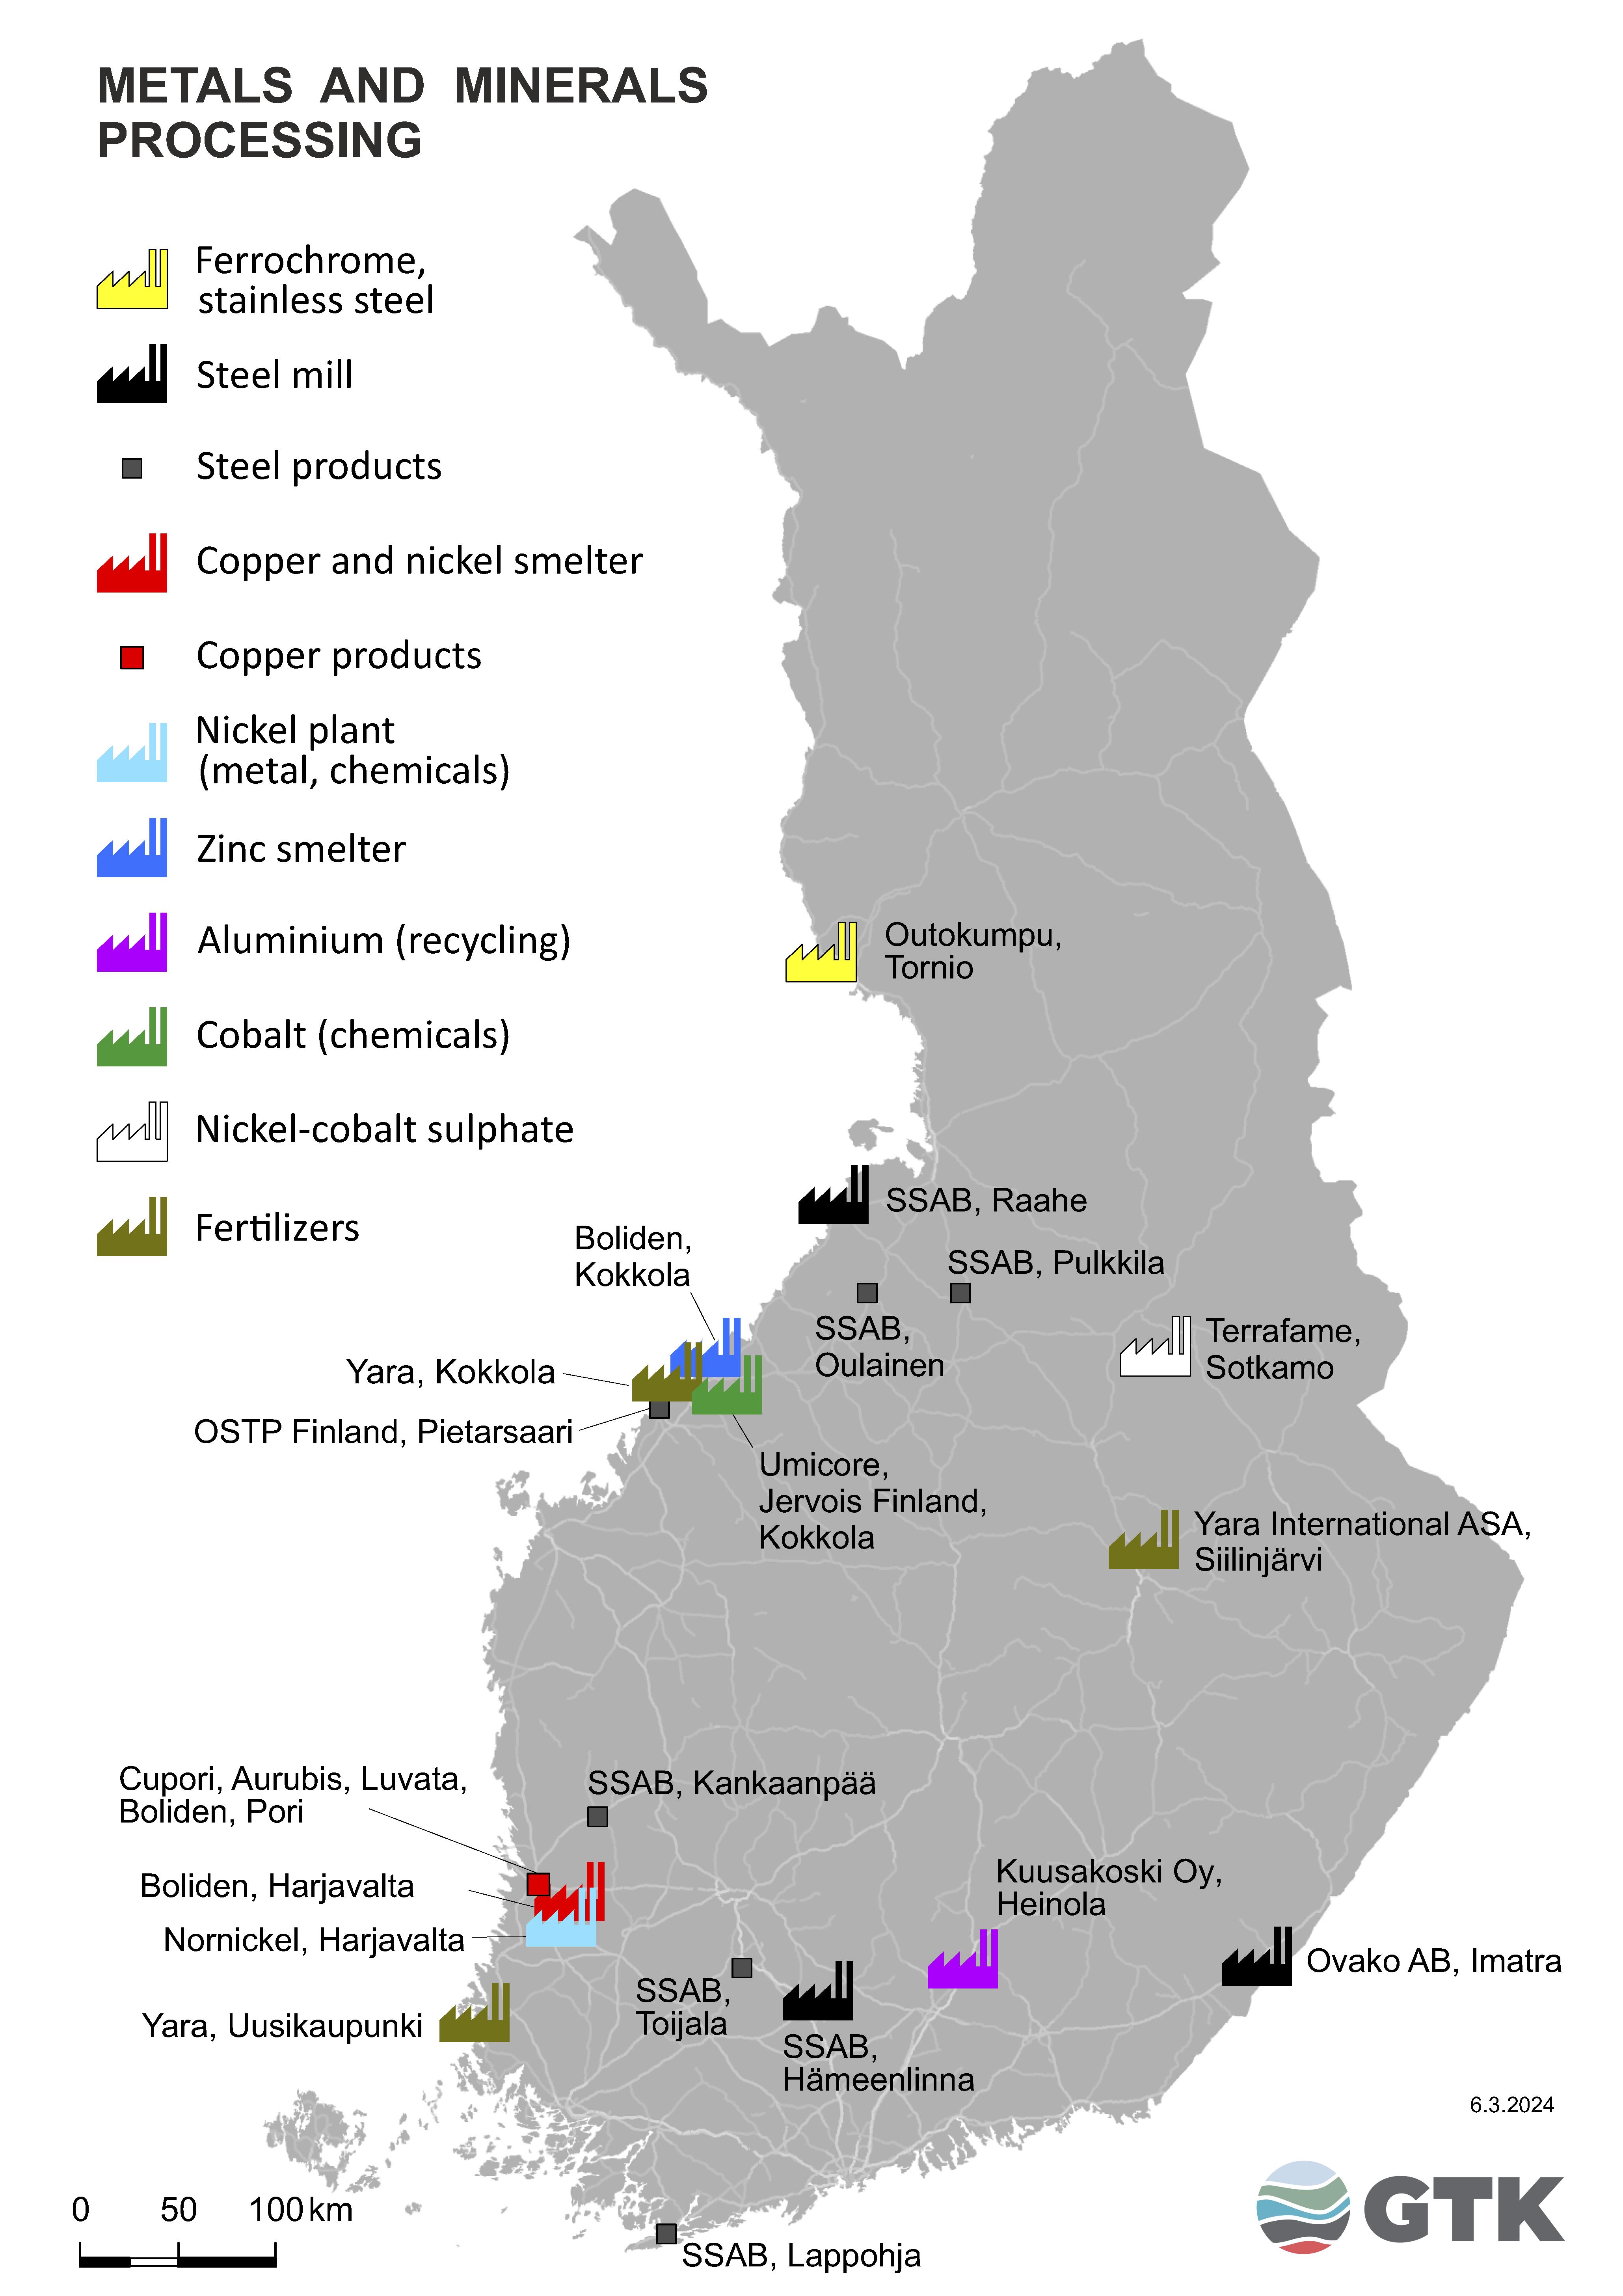 Metals and minerals provessing on the map of Finland